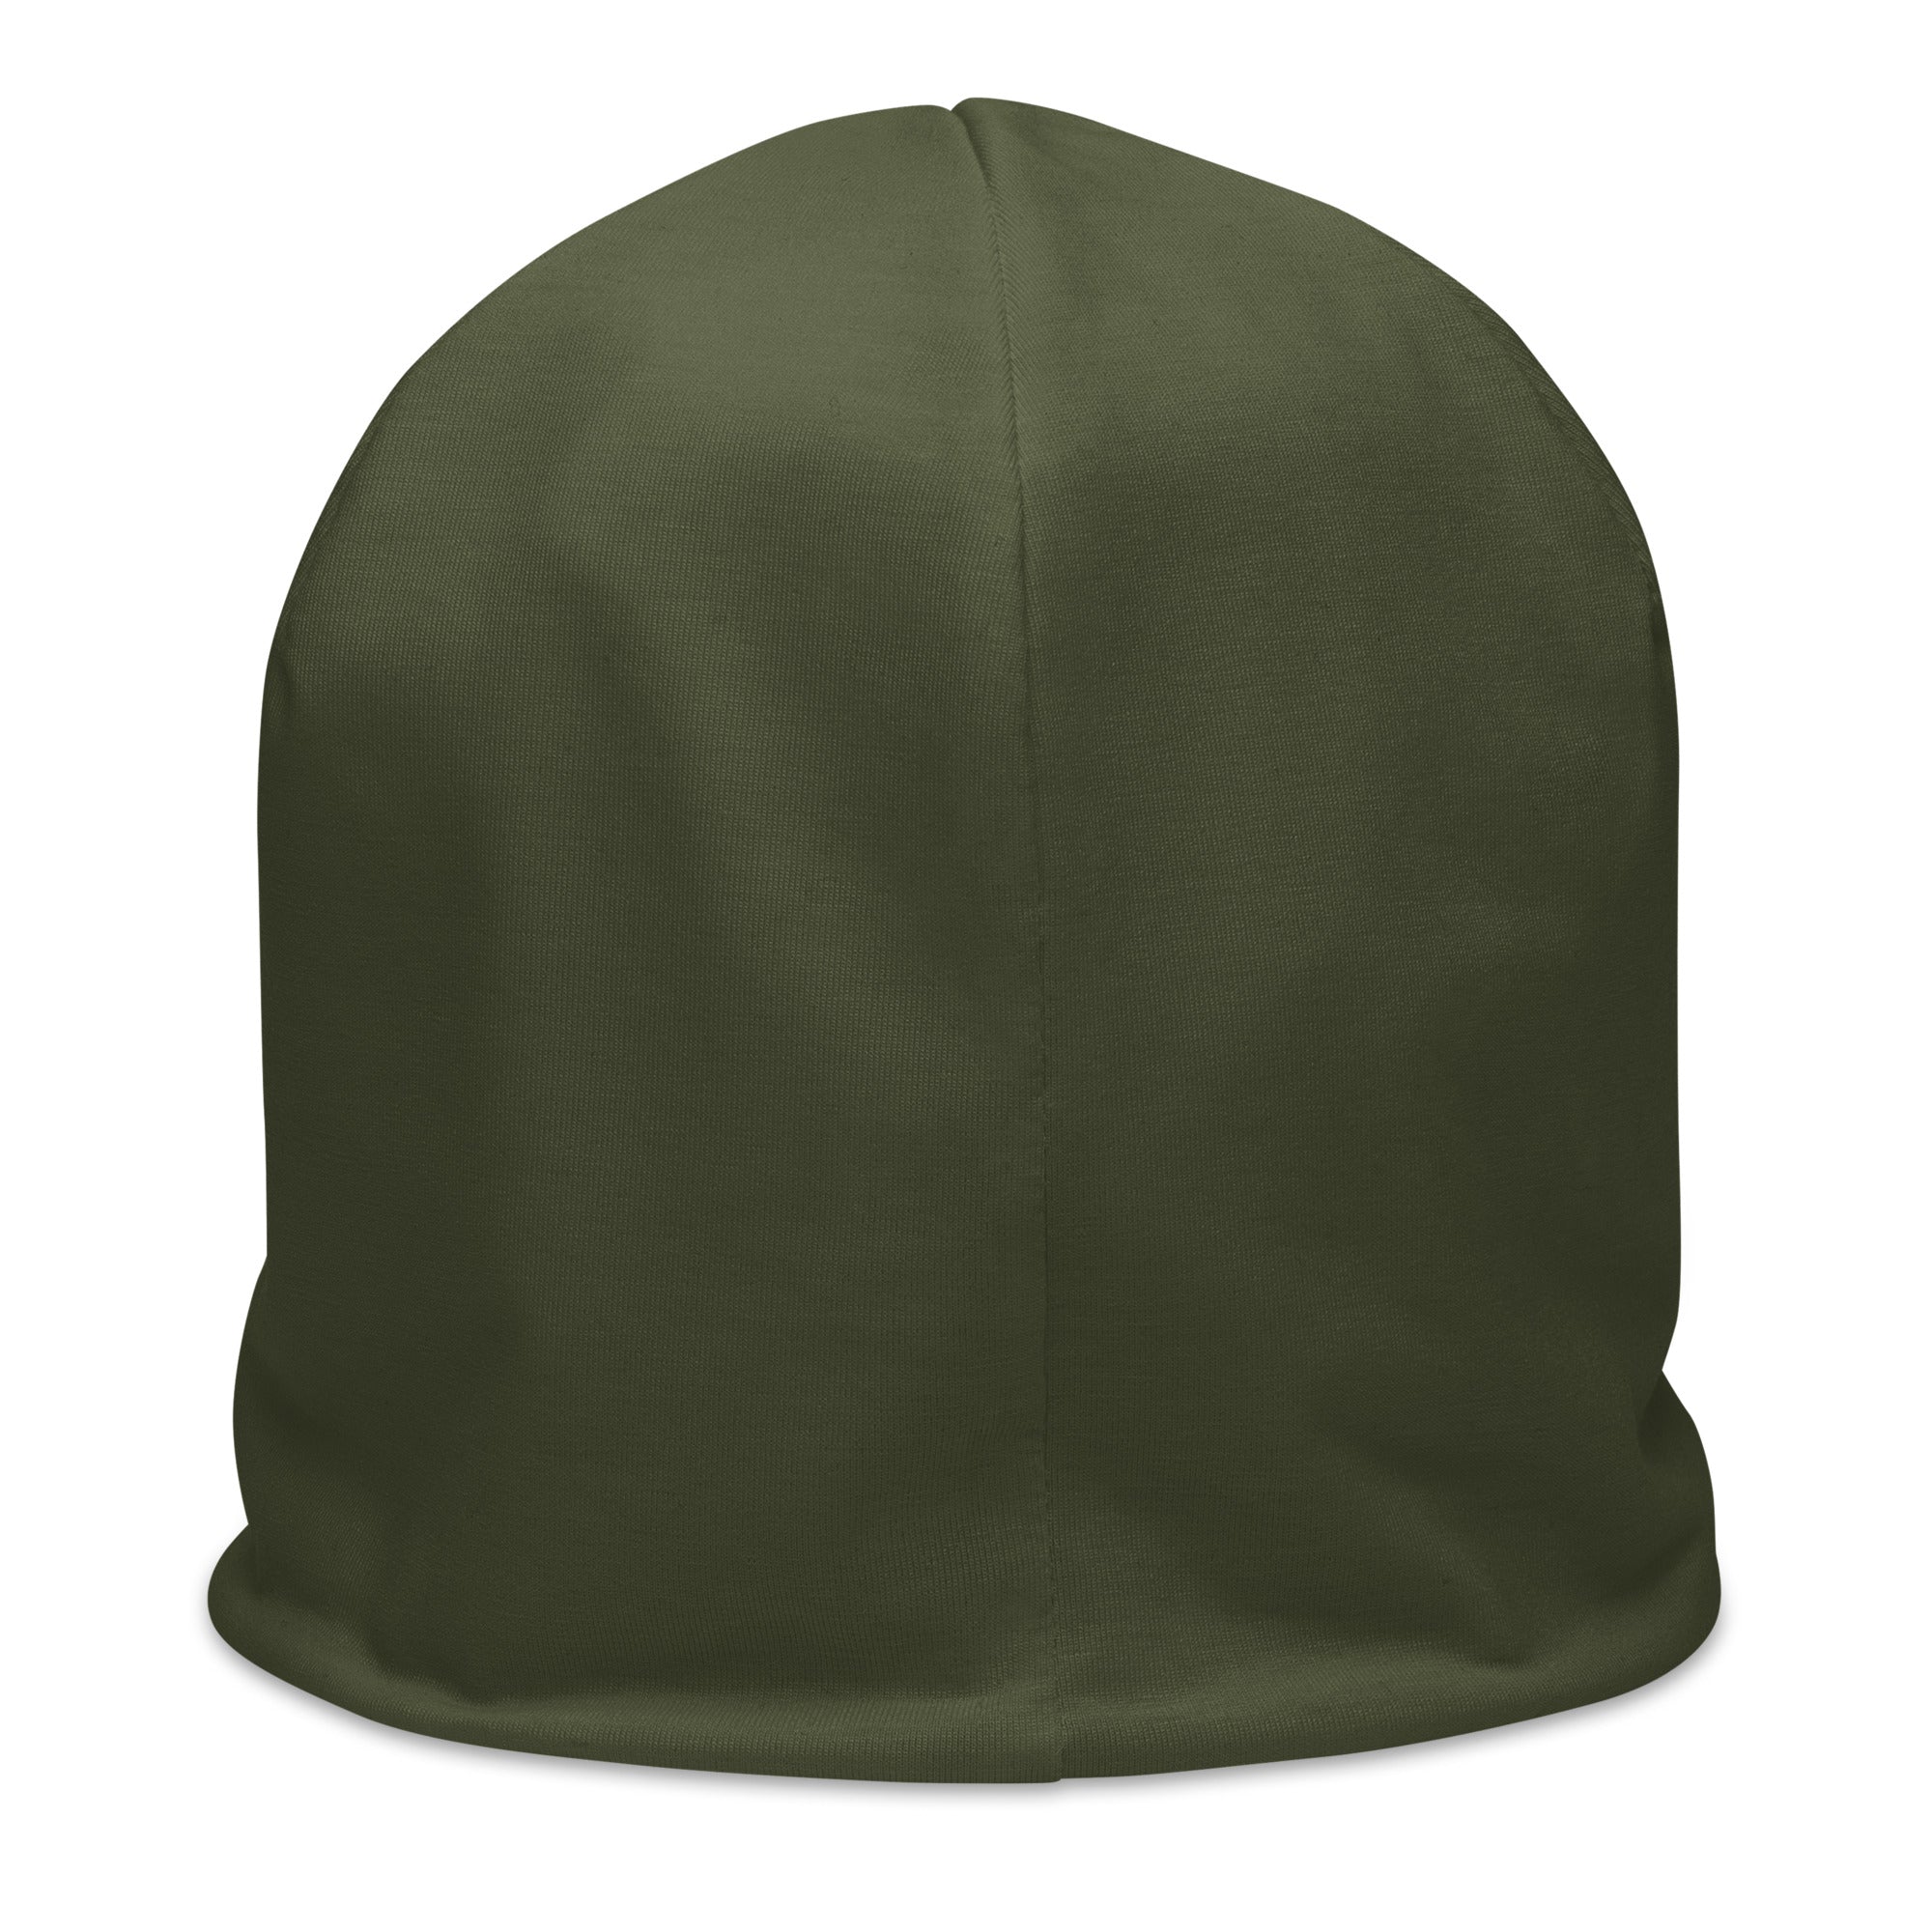 Sketchy Doodle Beanie, Green